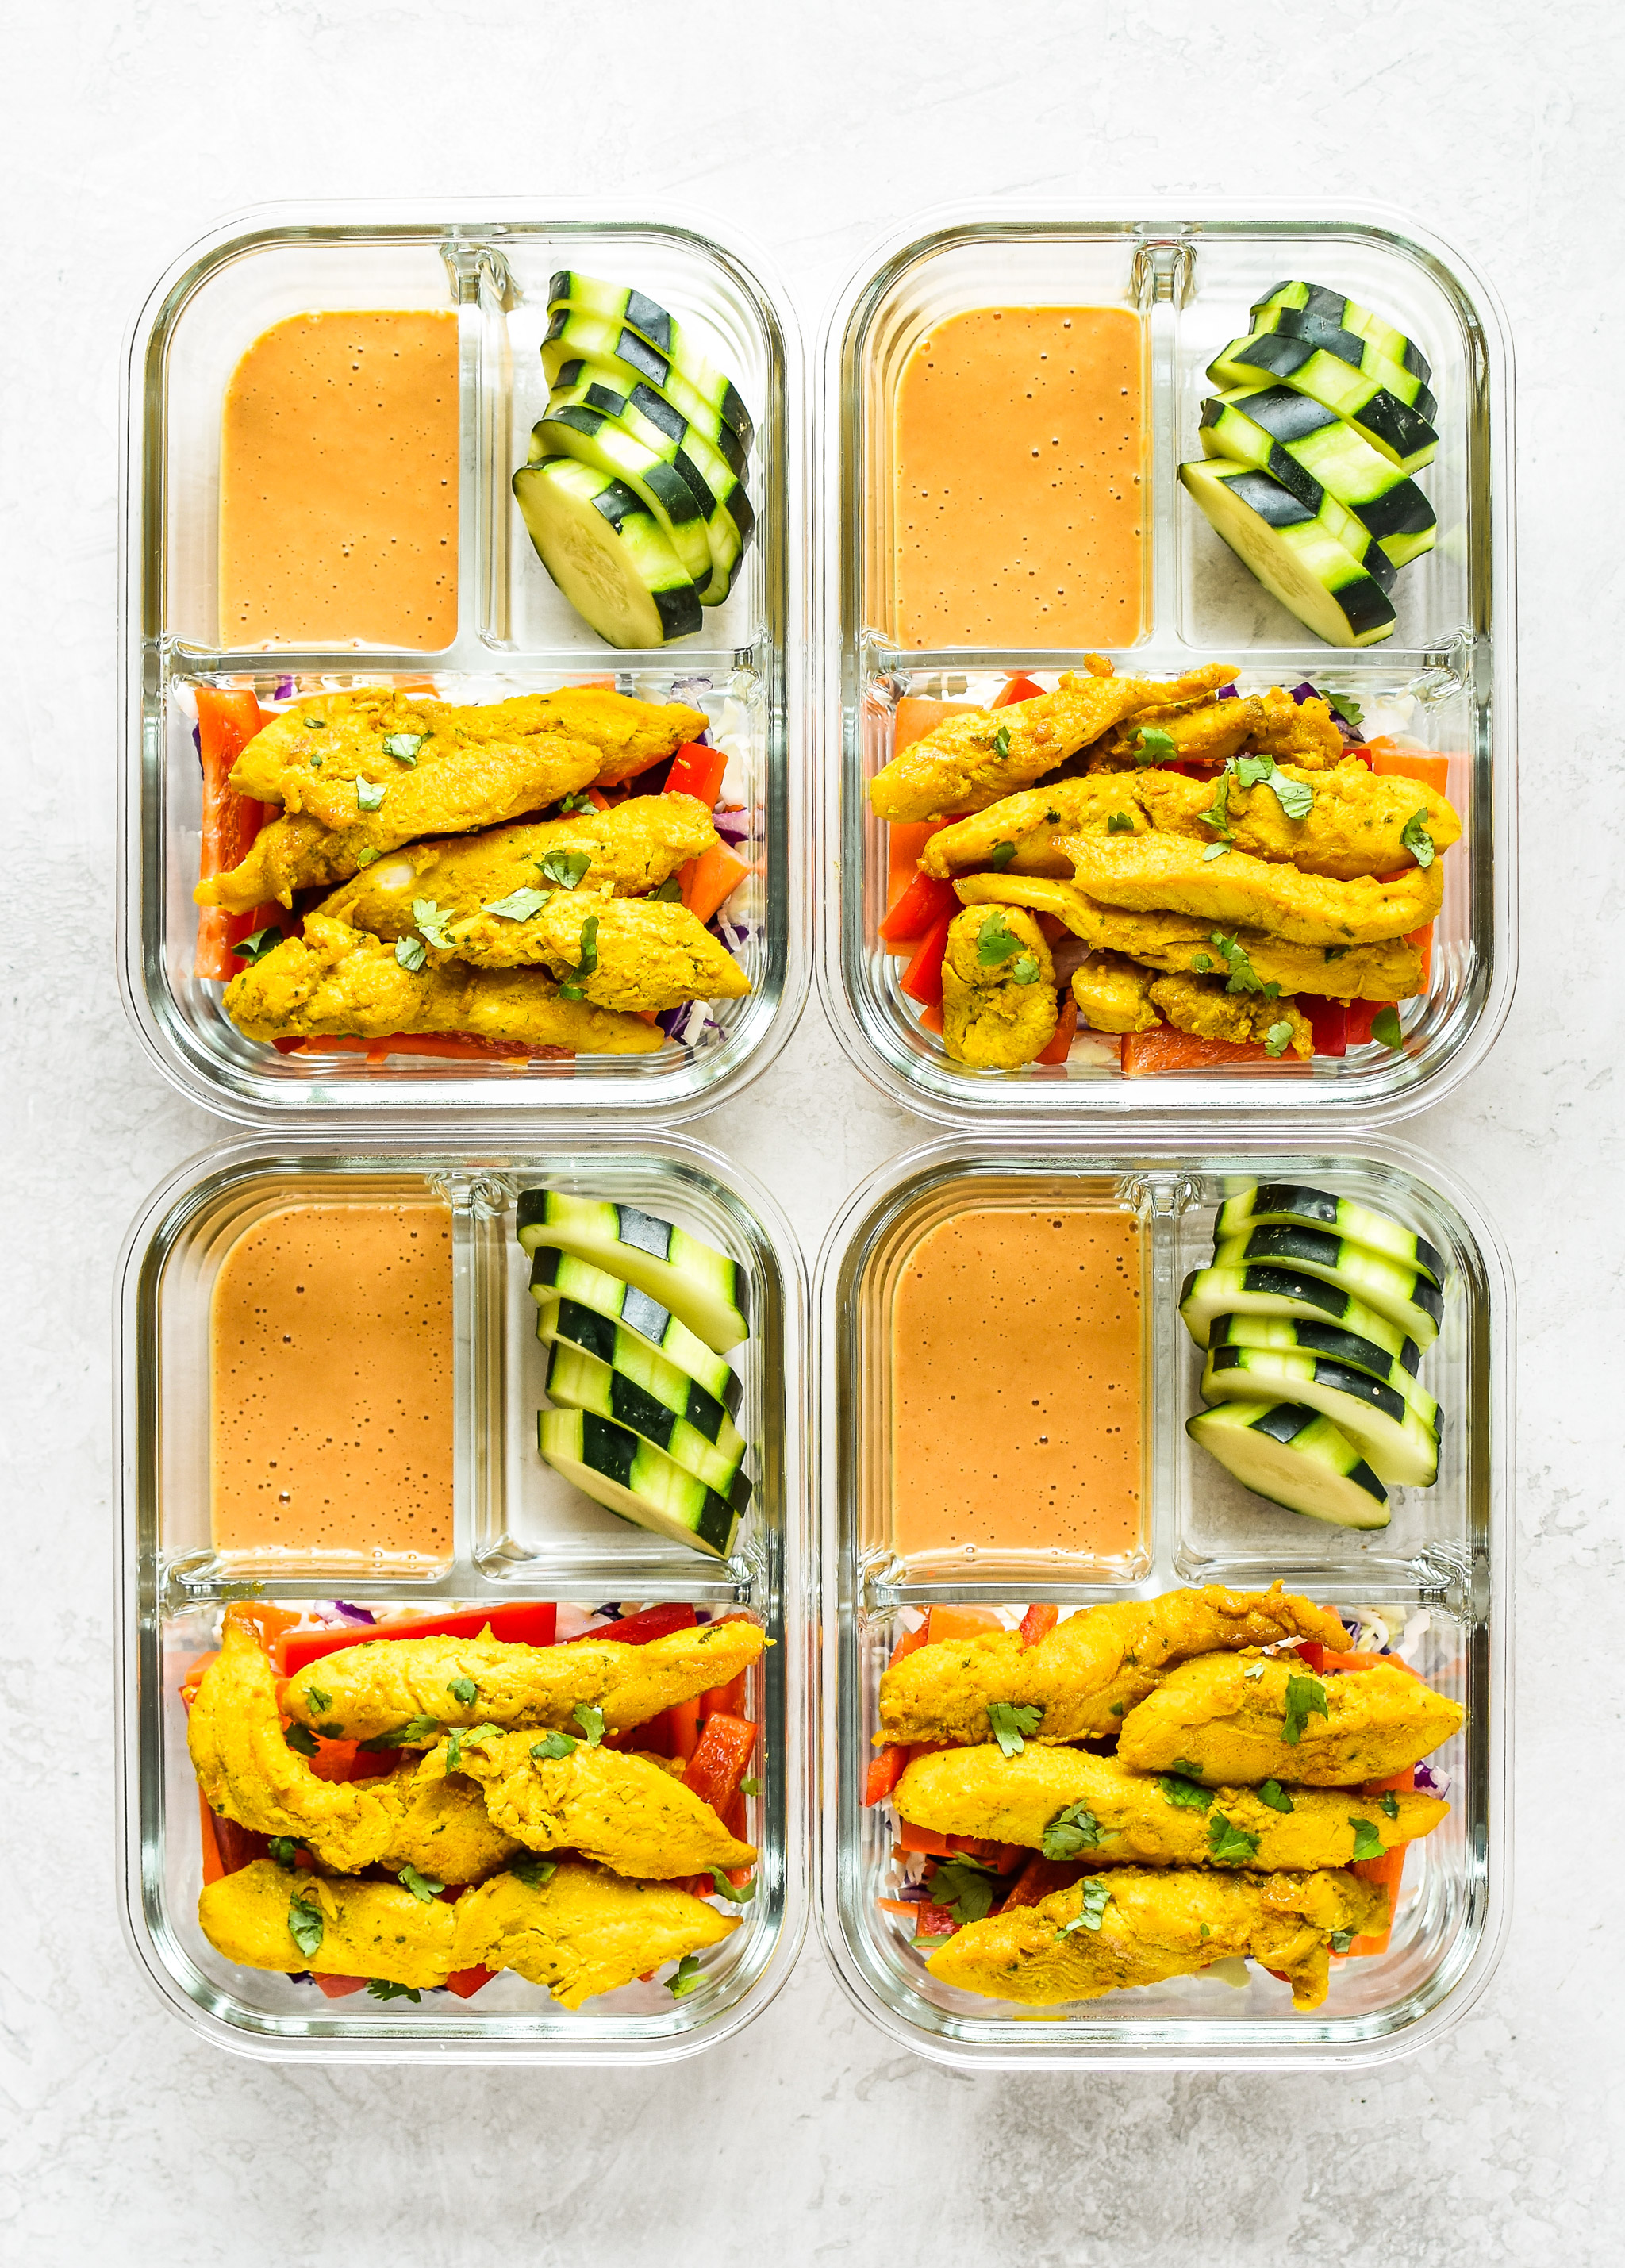 Meal Prep Satay Inspired Thai Chicken Salad Bowls portioned into meal prep containers, viewed from above.